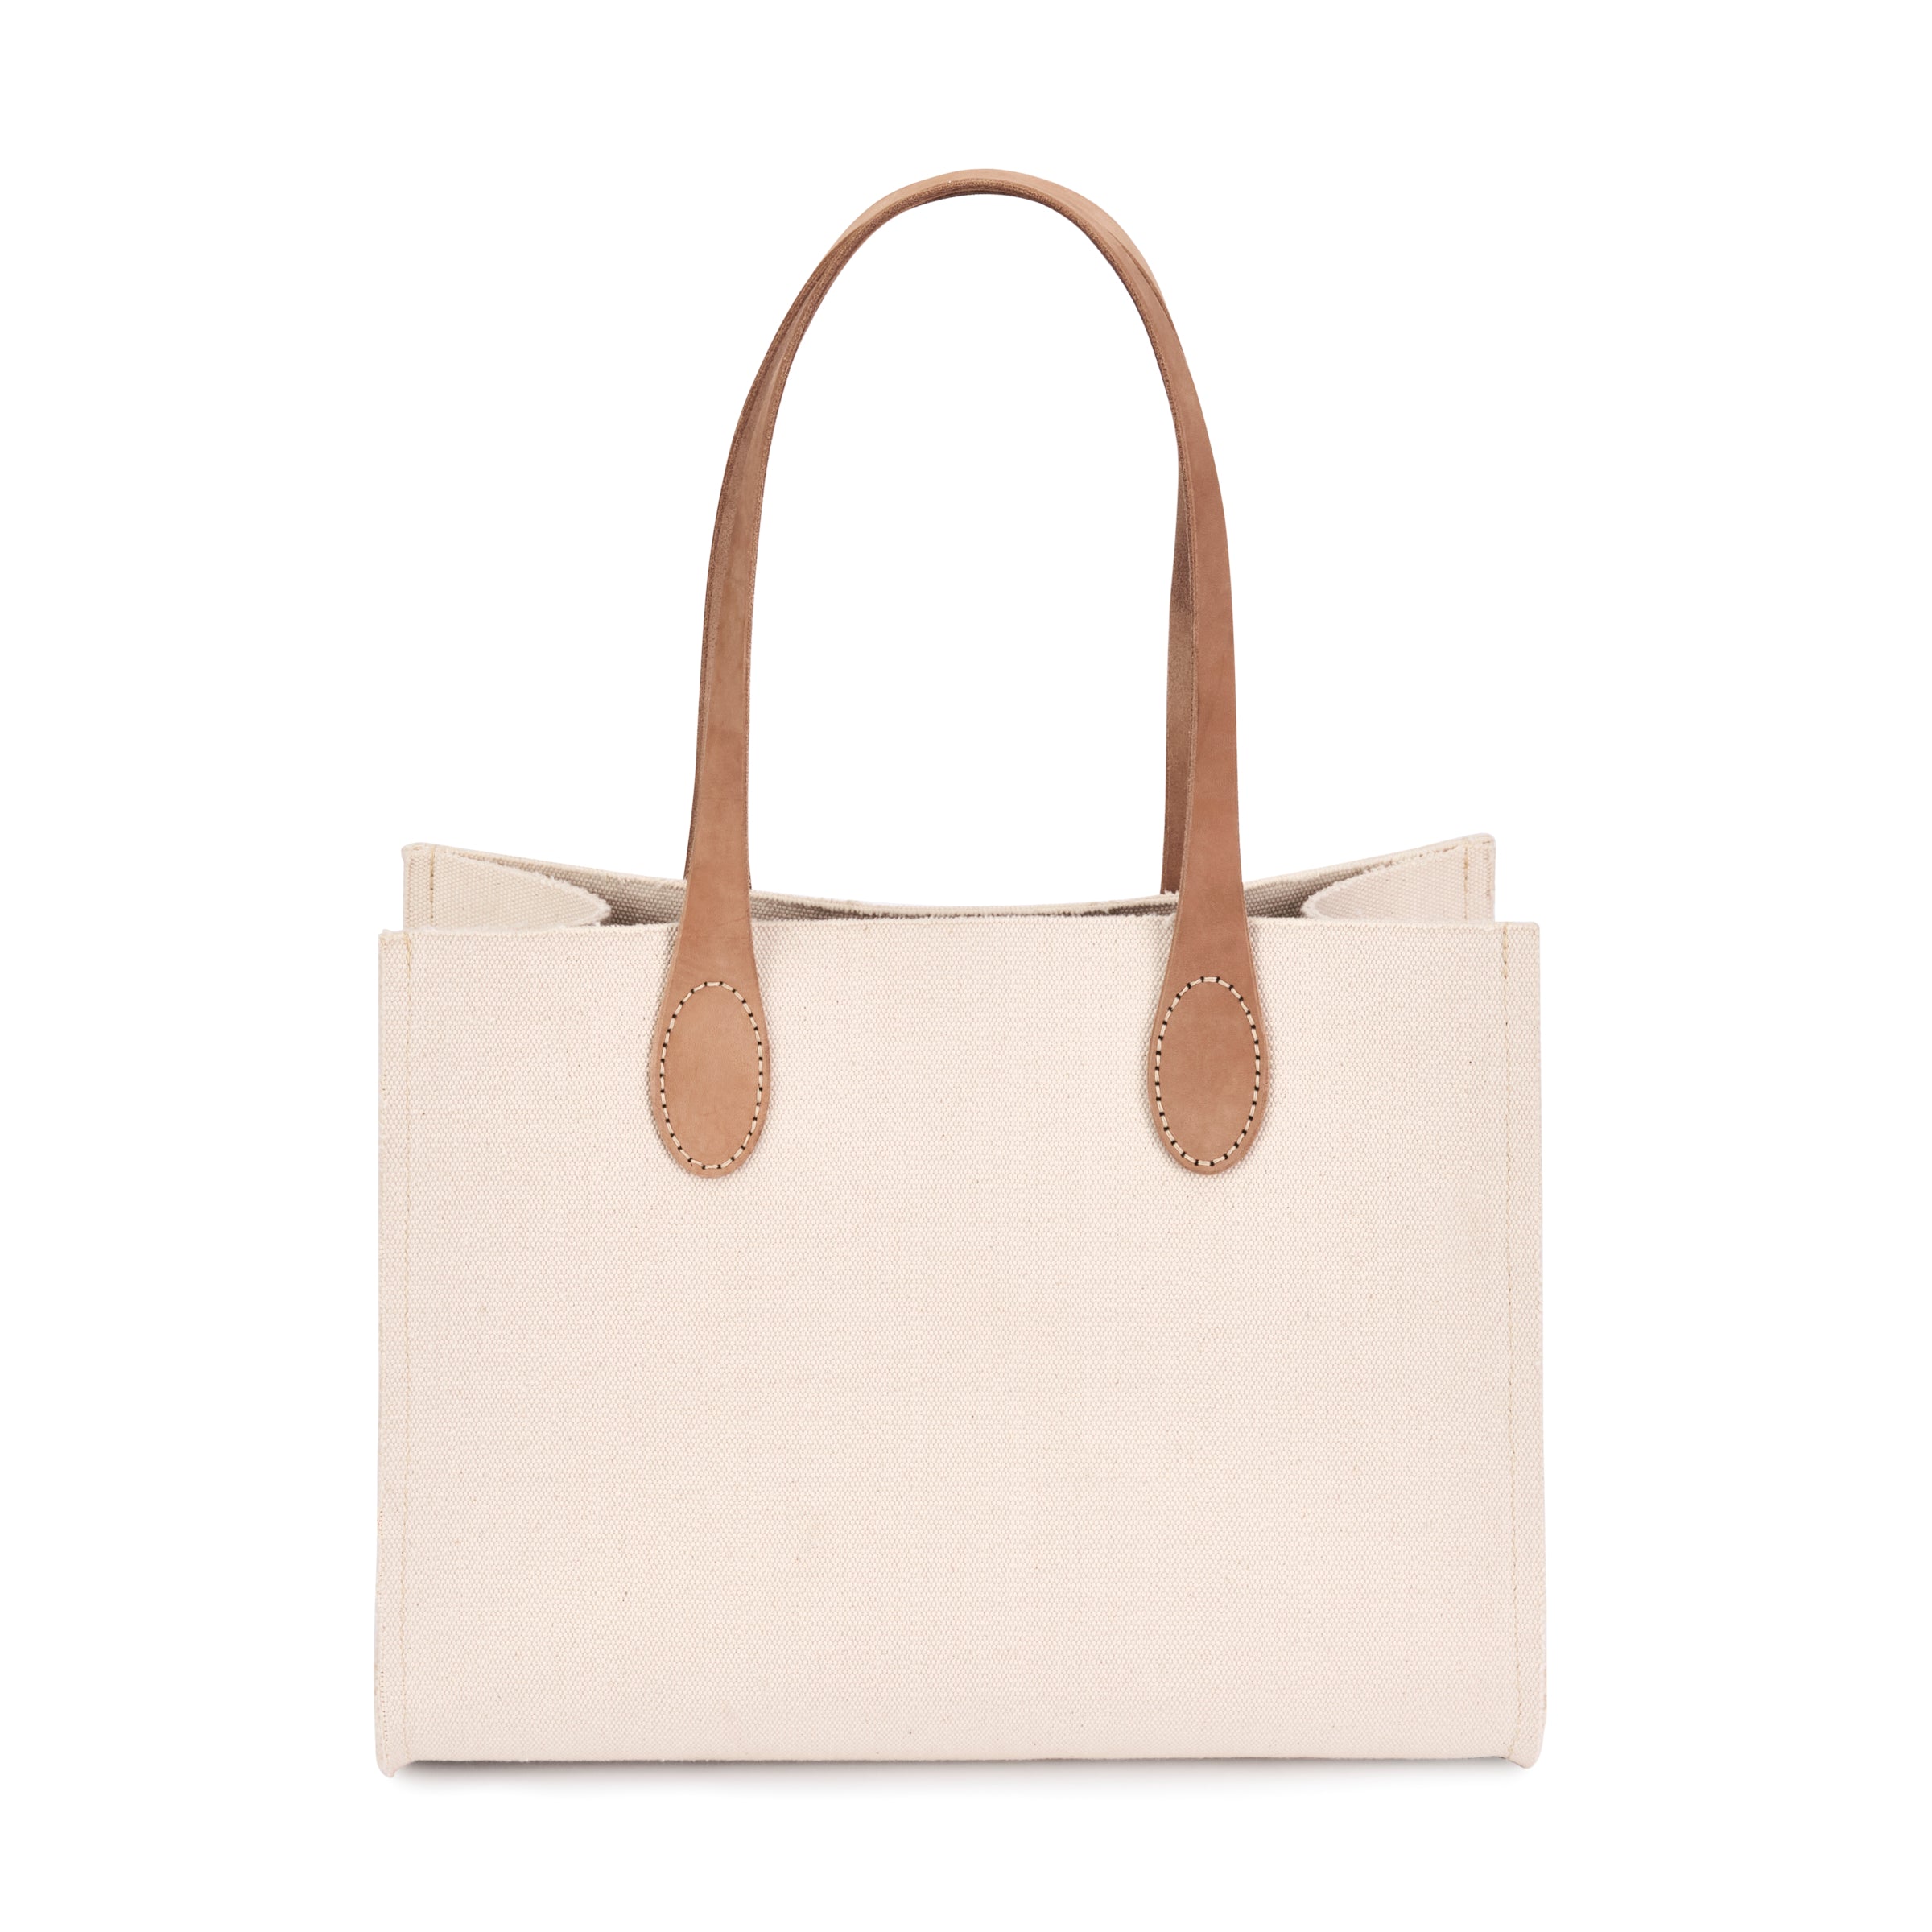 A front view of the Ava Canvas Tote in Beige by Ezra Arthur